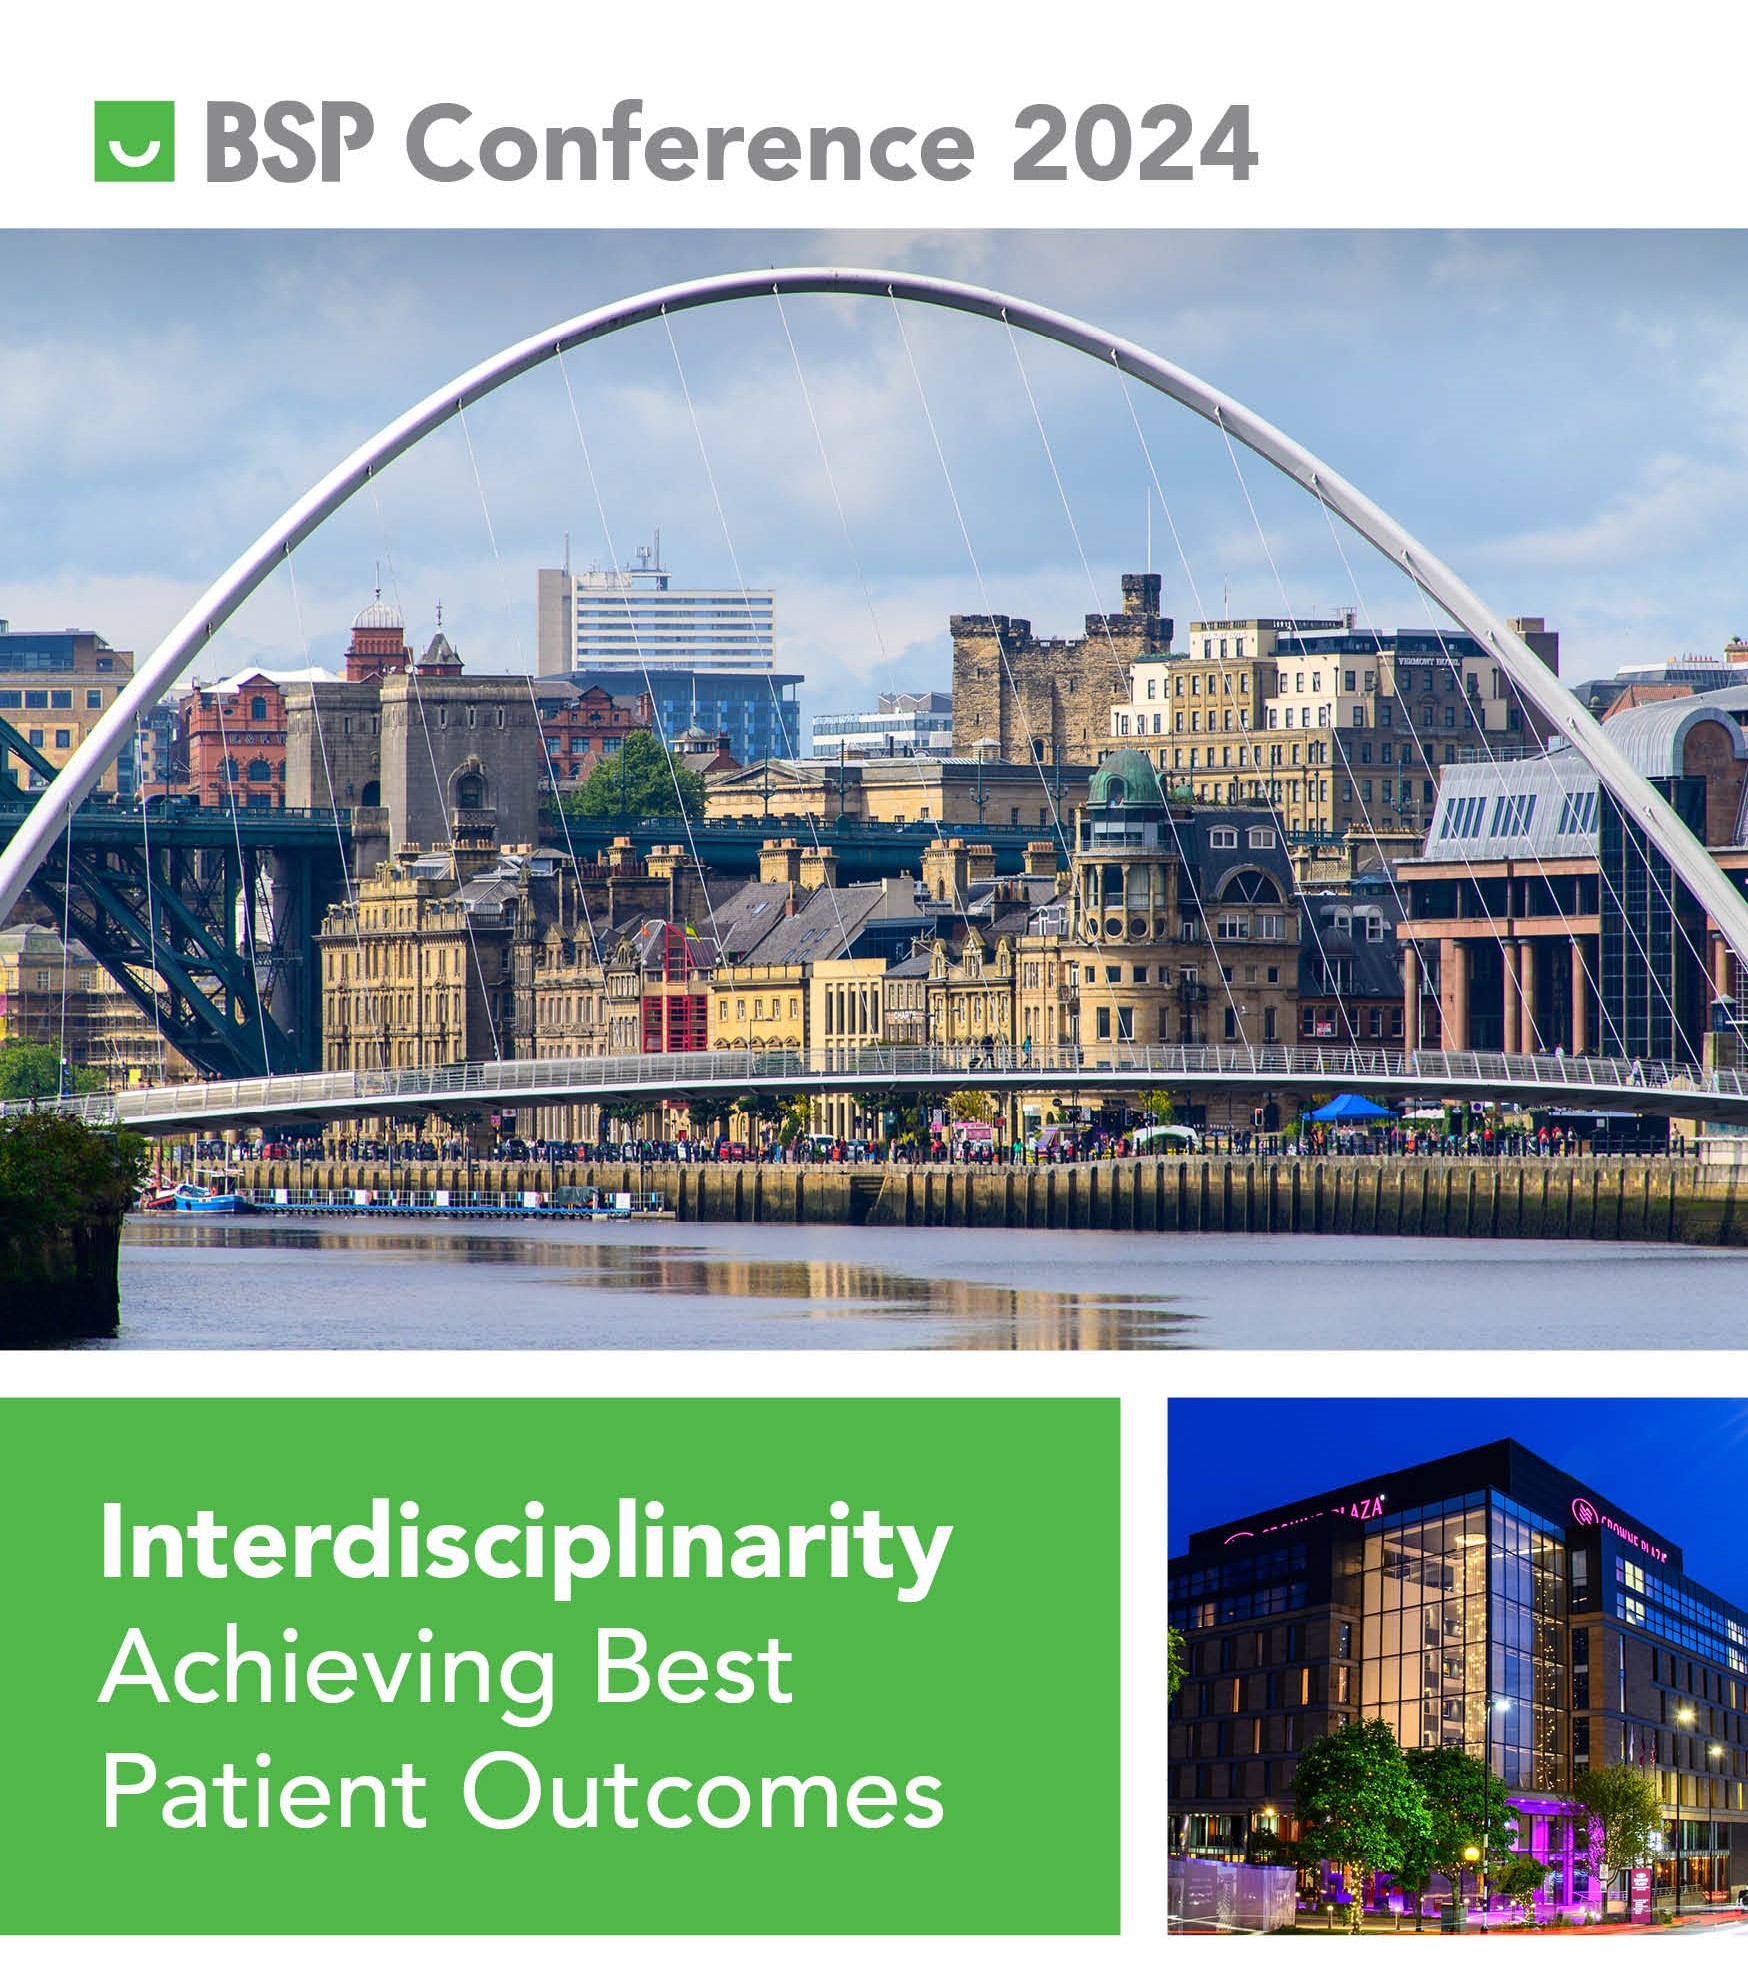 BSP Conference 2024